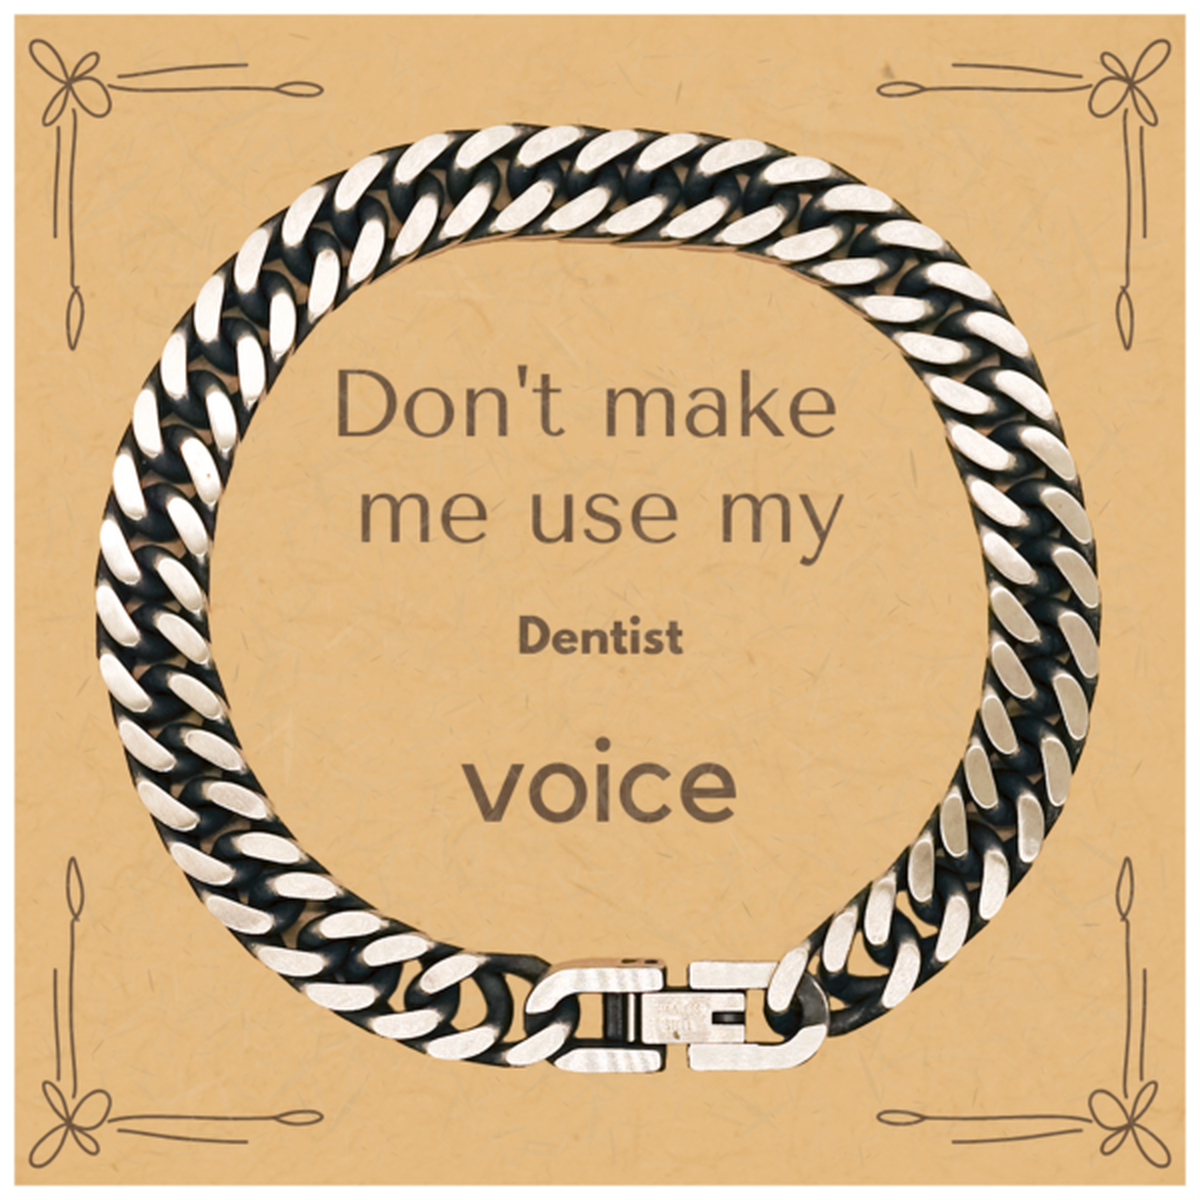 Don't make me use my Dentist voice, Sarcasm Dentist Card Gifts, Christmas Dentist Cuban Link Chain Bracelet Birthday Unique Gifts For Dentist Coworkers, Men, Women, Colleague, Friends